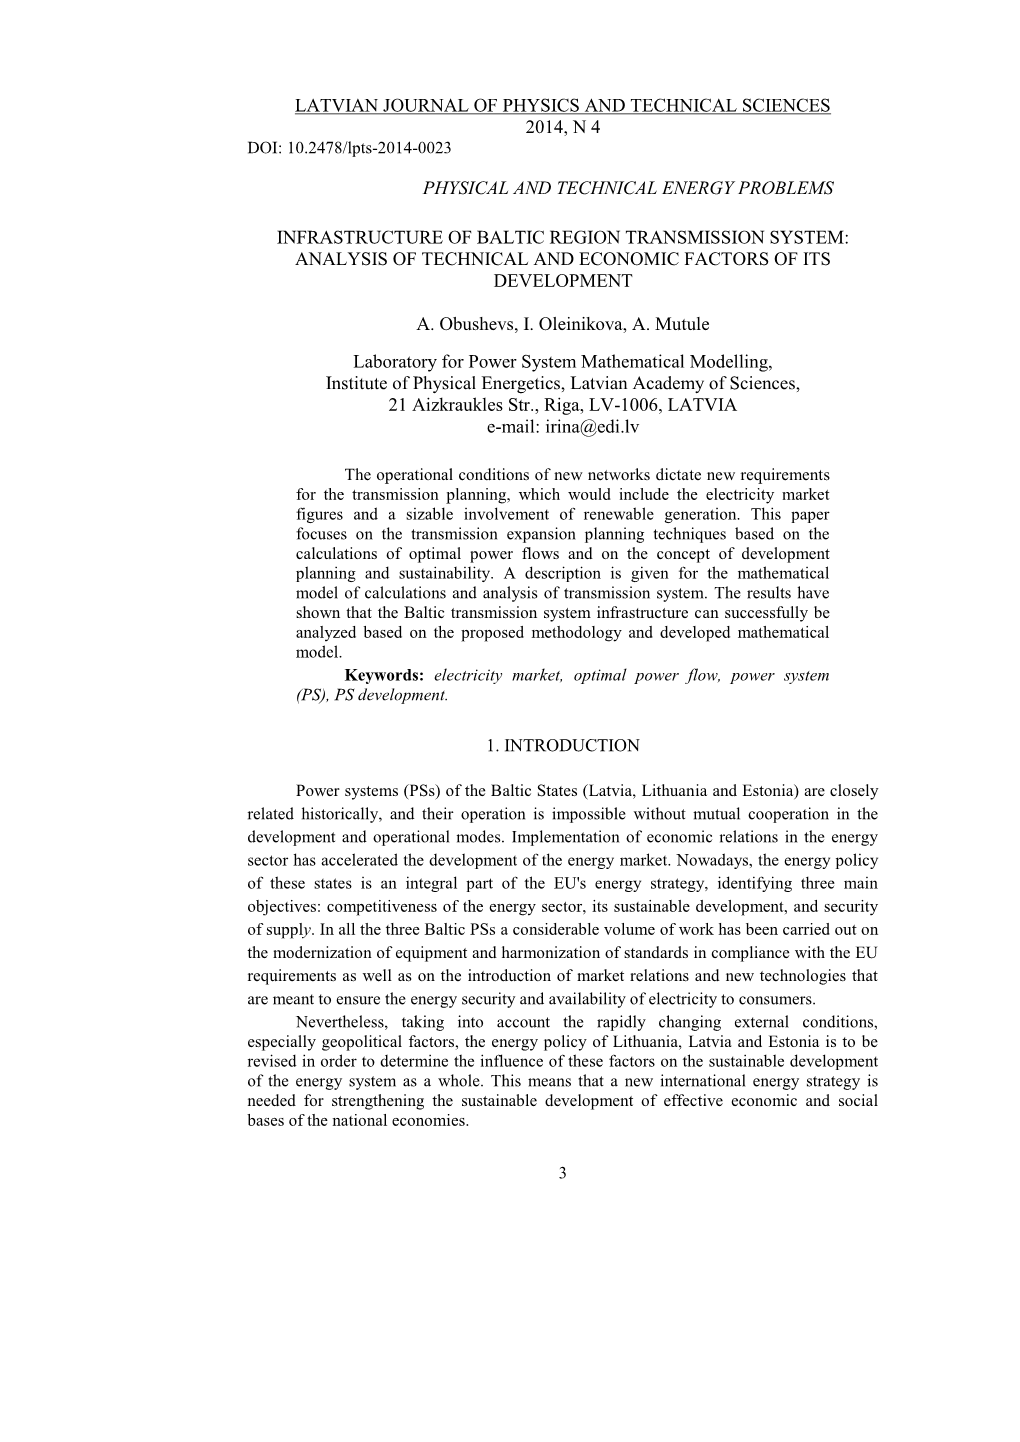 LATVIAN JOURNAL of PHYSICS and TECHNICAL SCIENCES 2014, N 4 DOI: 10.2478/Lpts-2014-0023